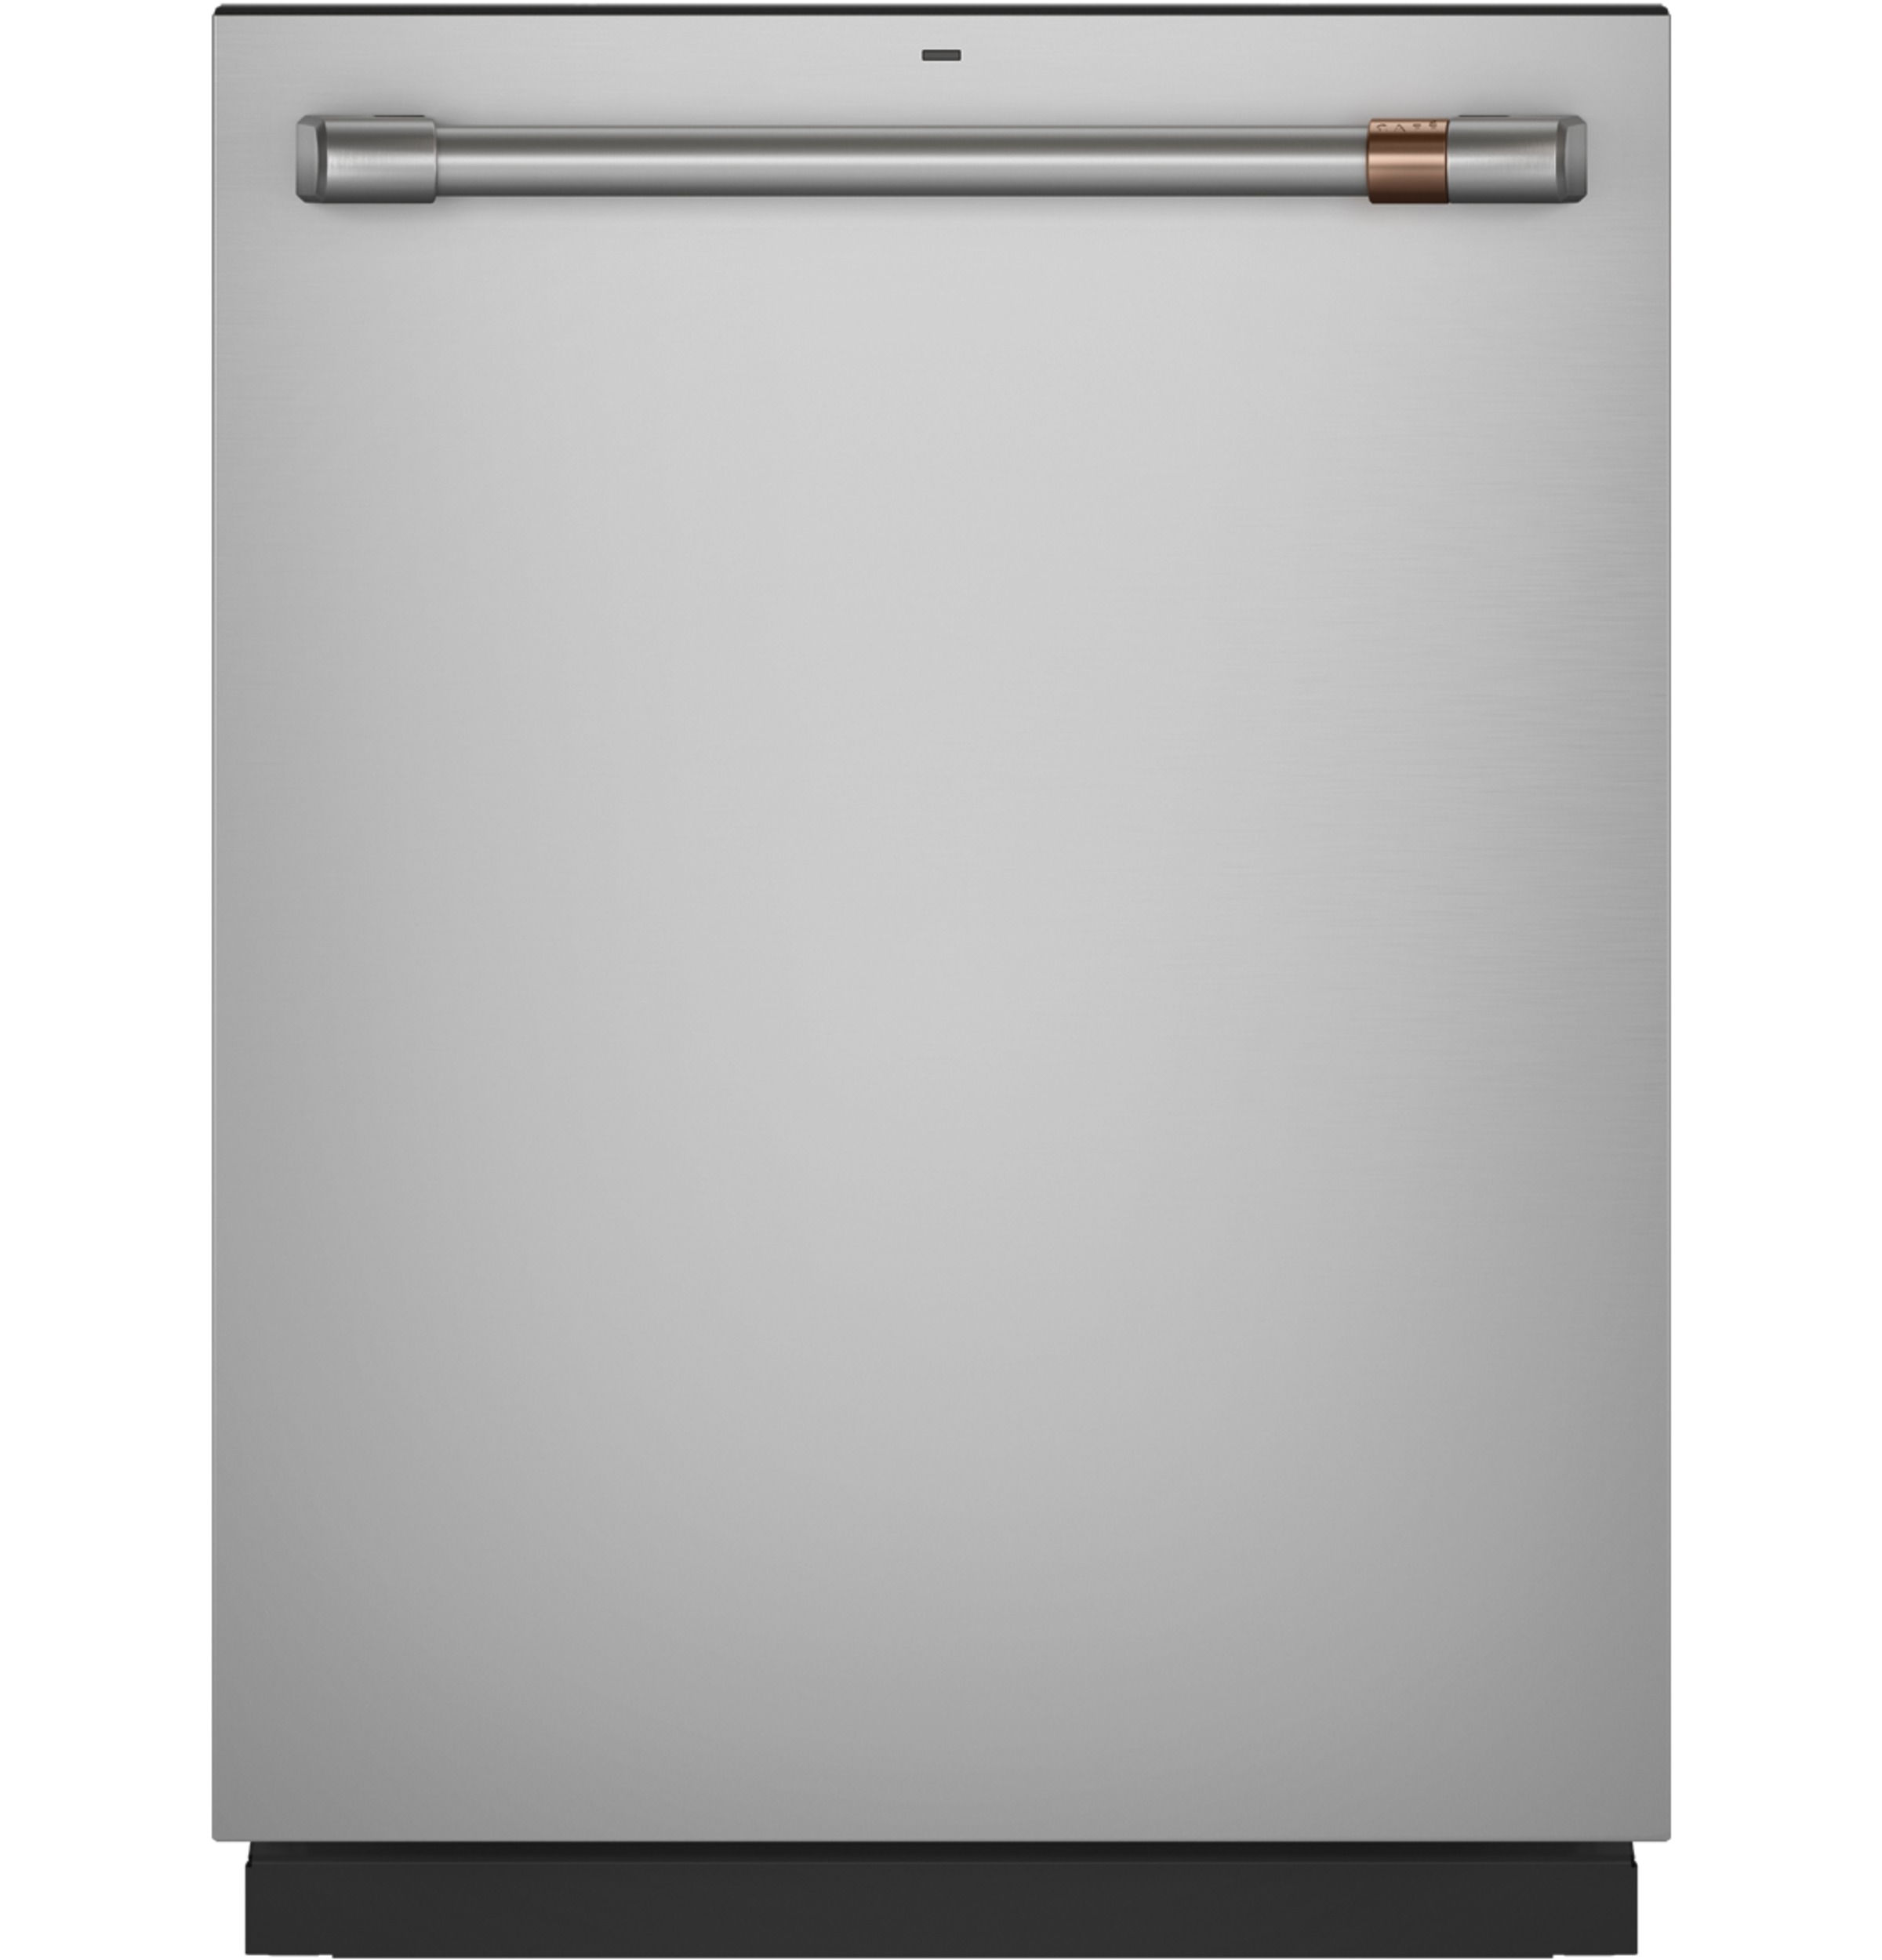 Café™ ENERGY STAR® Stainless Steel Interior Dishwasher with Sanitization and Ultra Dry